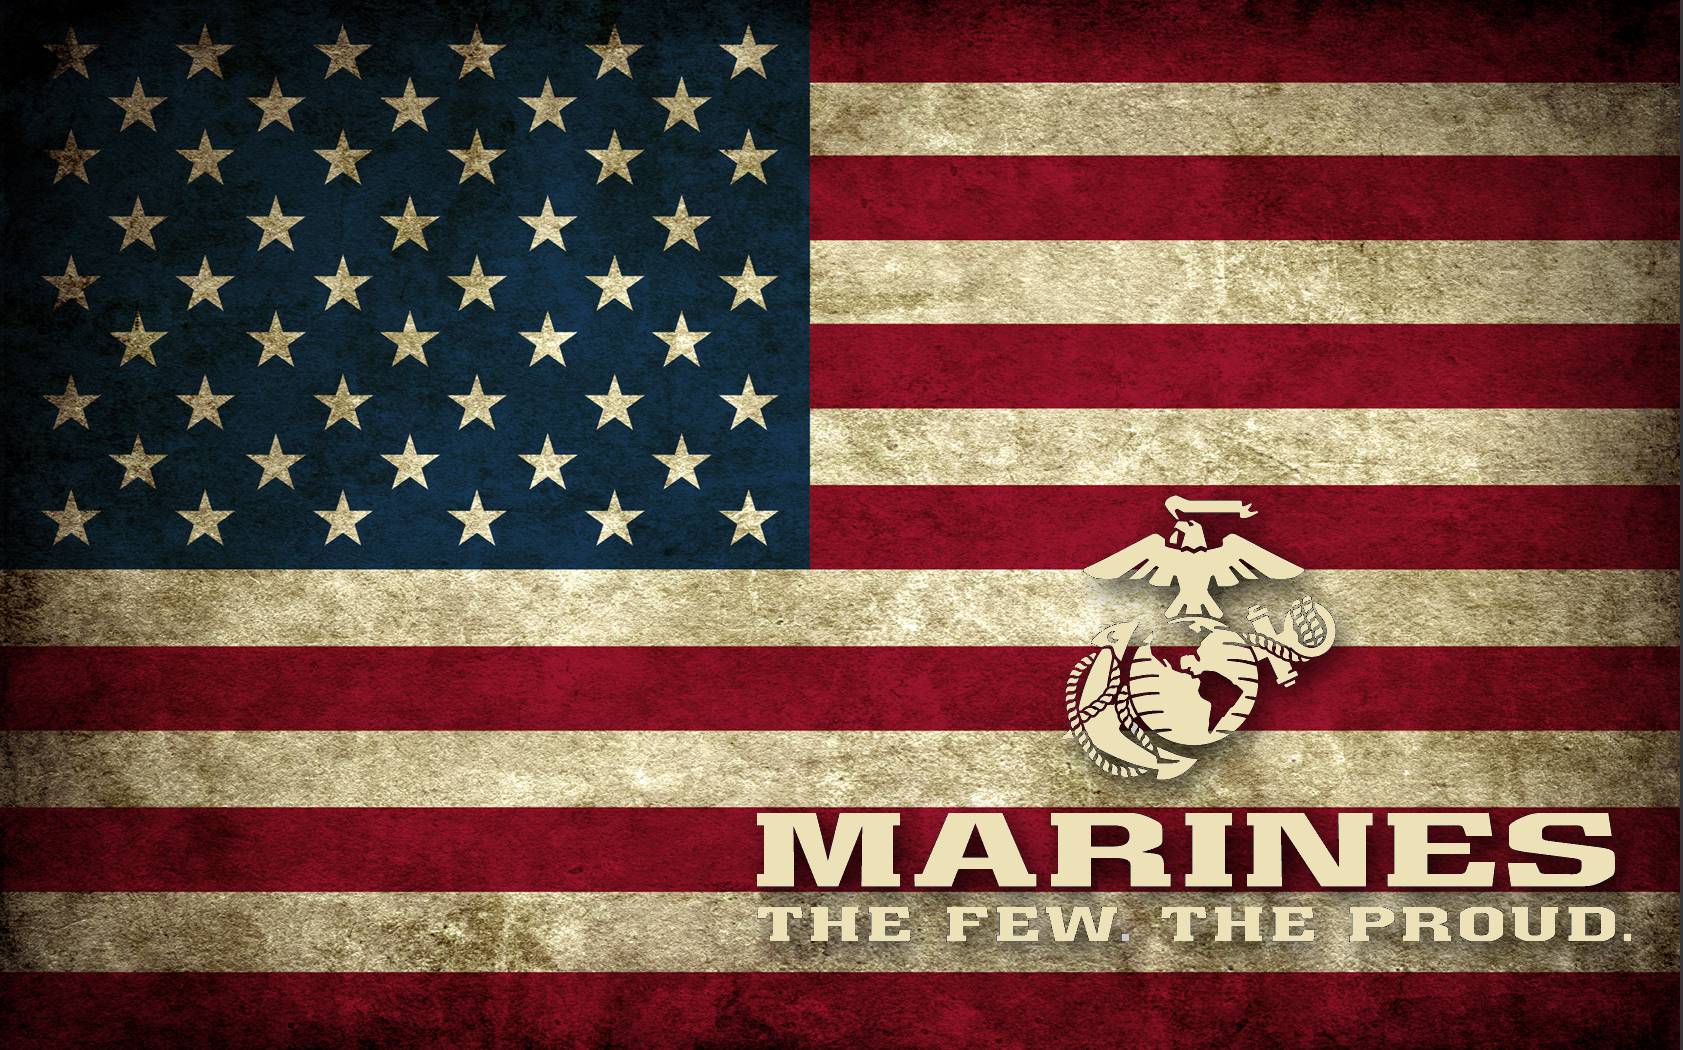 Us Marine Corps Wallpaper Images amp Pictures   Becuo